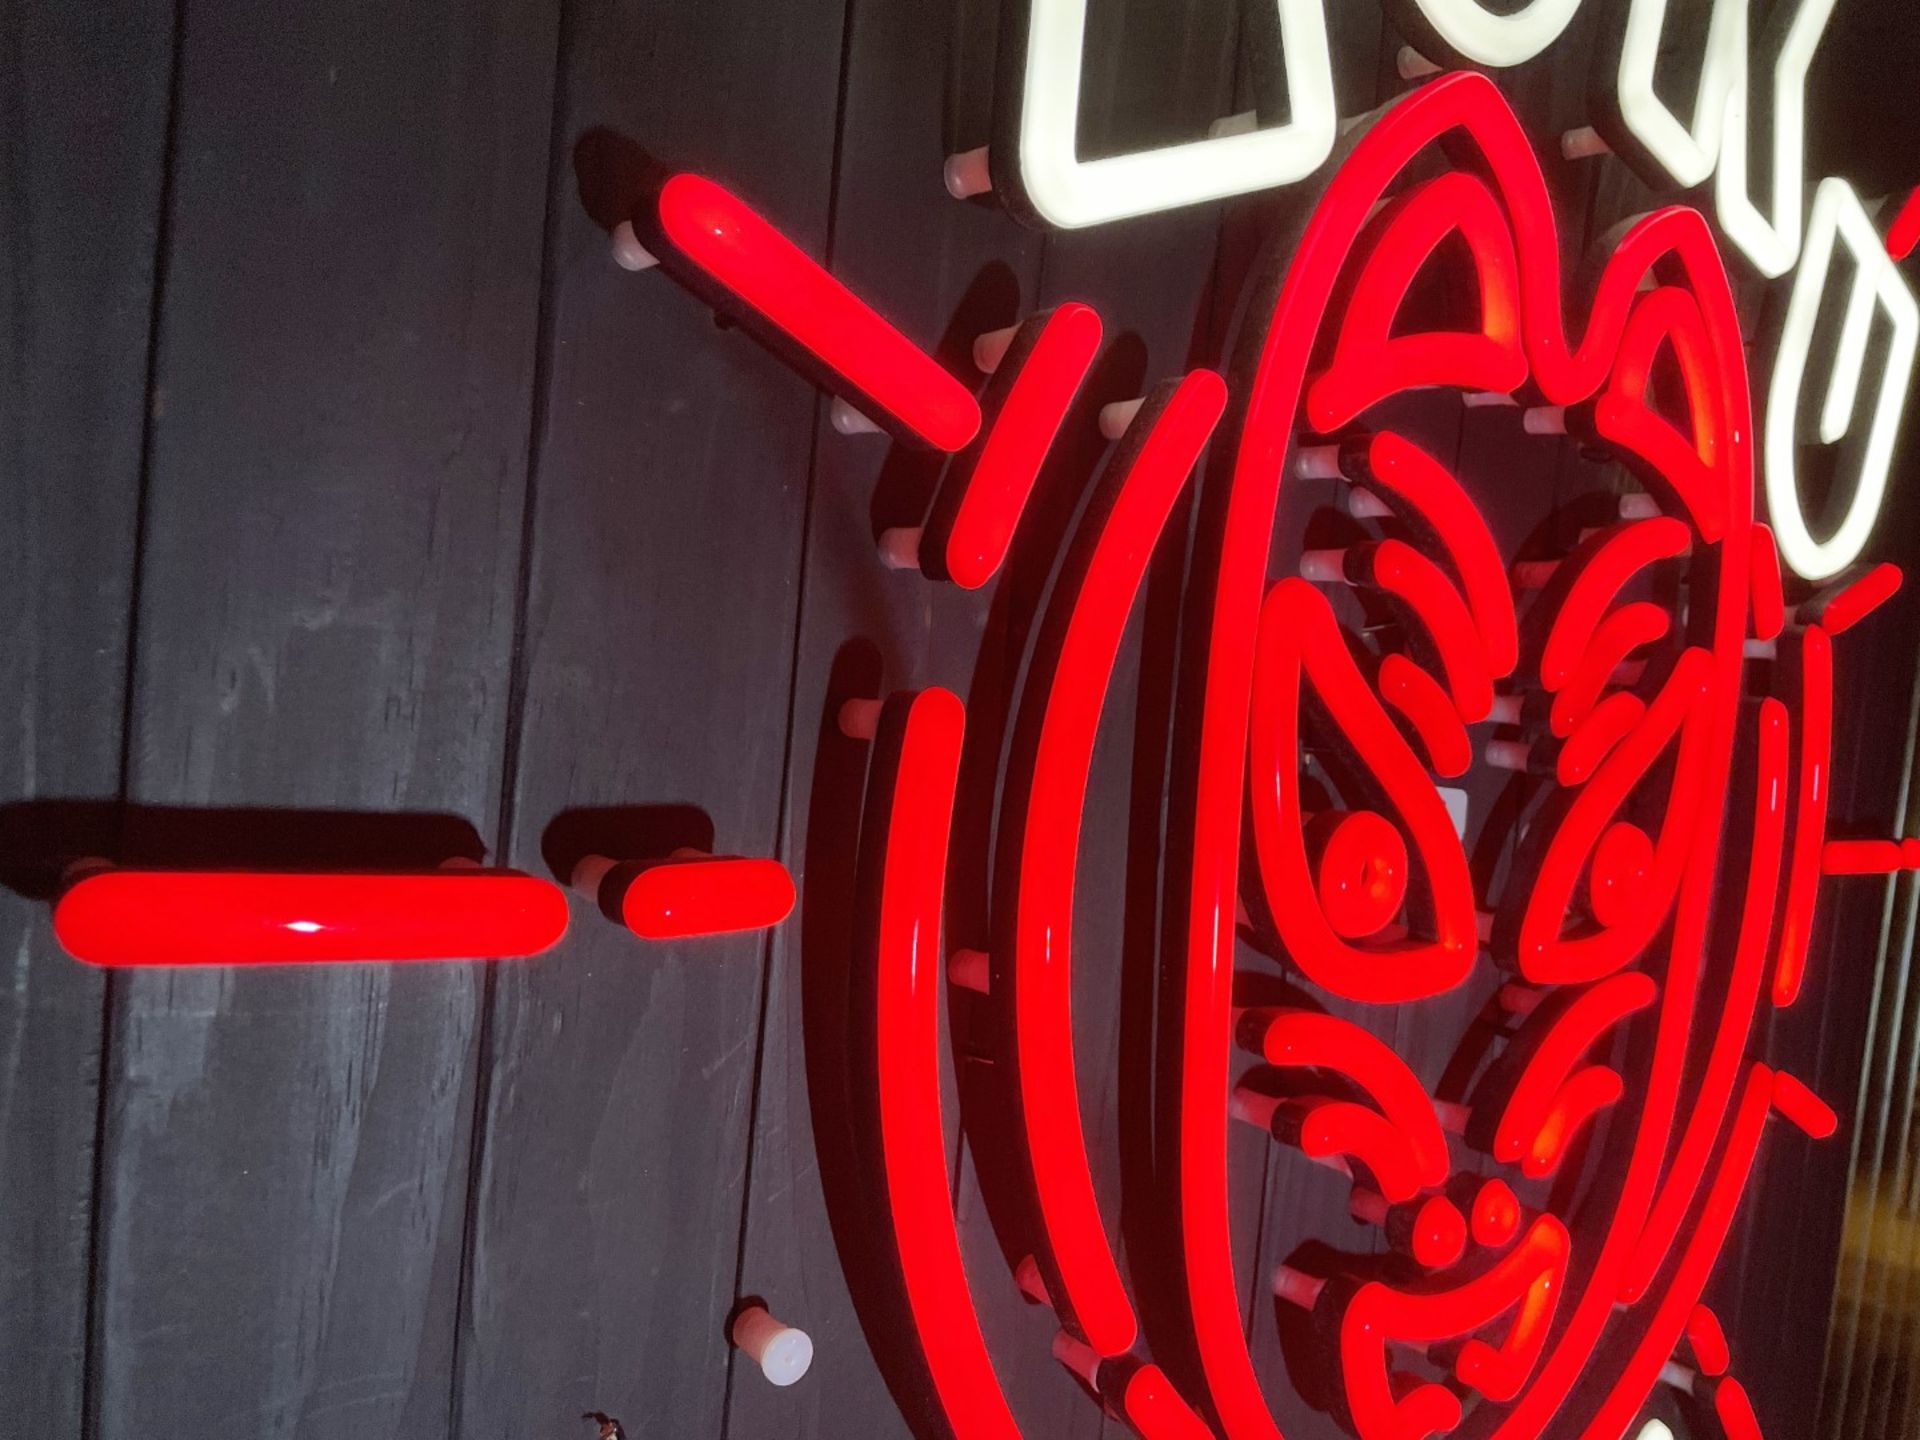 1 x RED NEON Illuminated Wall Sign ZOKU RECORDS Mounted on a Black Wooden Wall Panel - Image 3 of 5